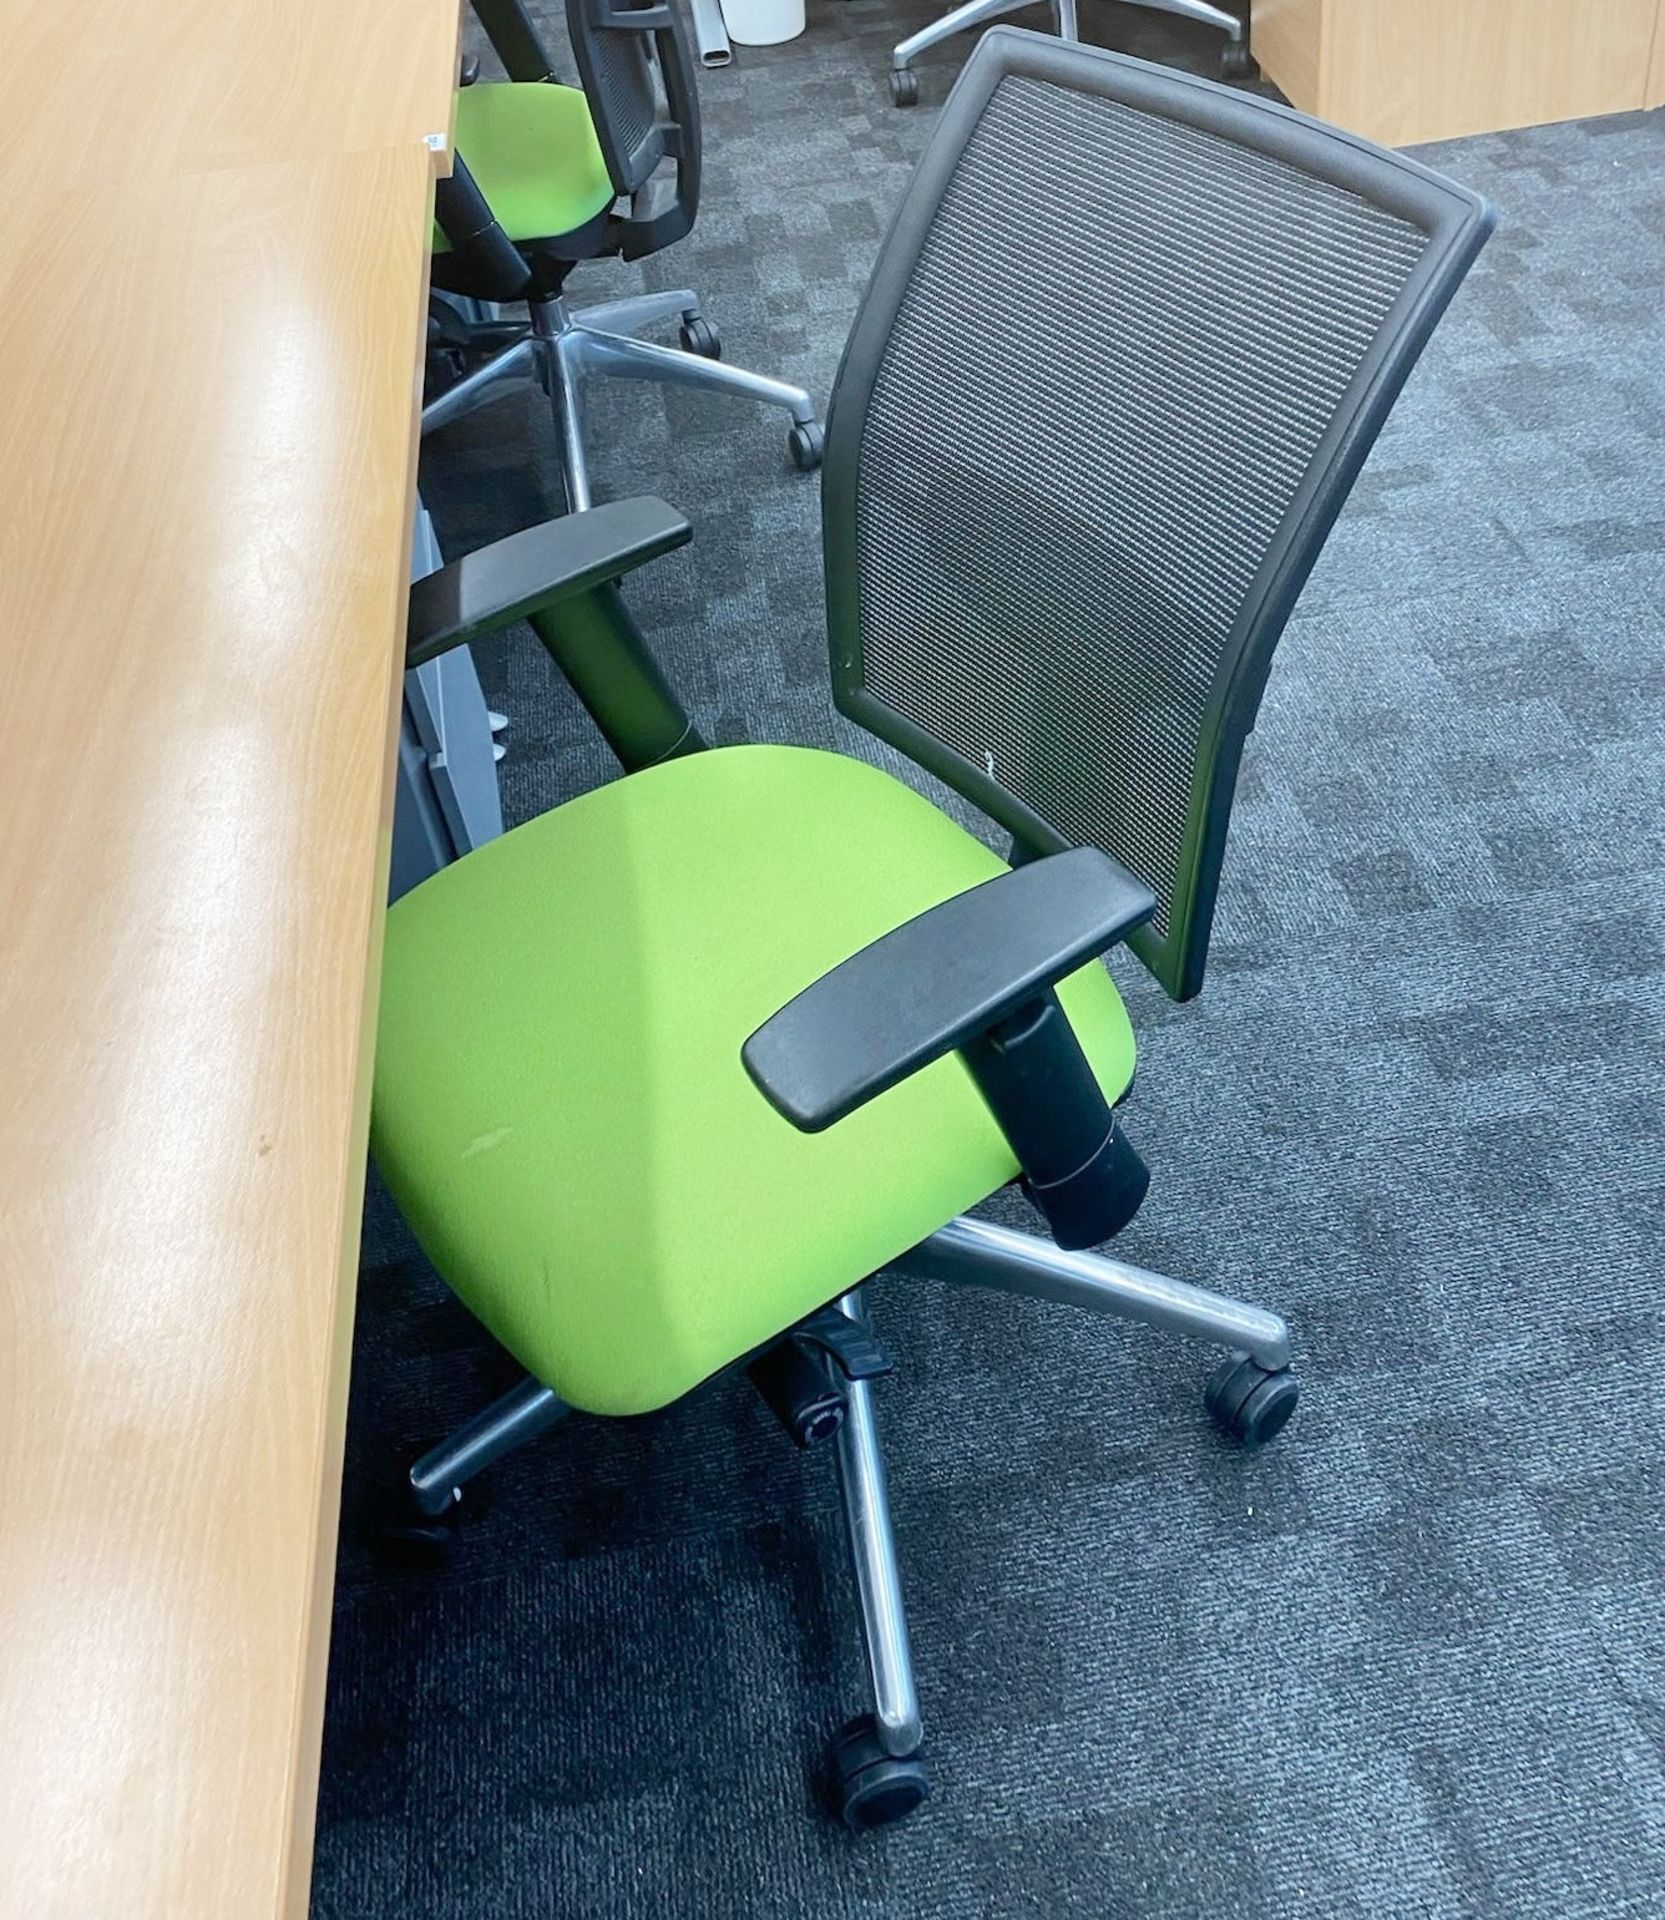 4 x Contemporary Beech Office Desks With Grey Pedestals and Green/Black Swivel Chairs - Image 4 of 4